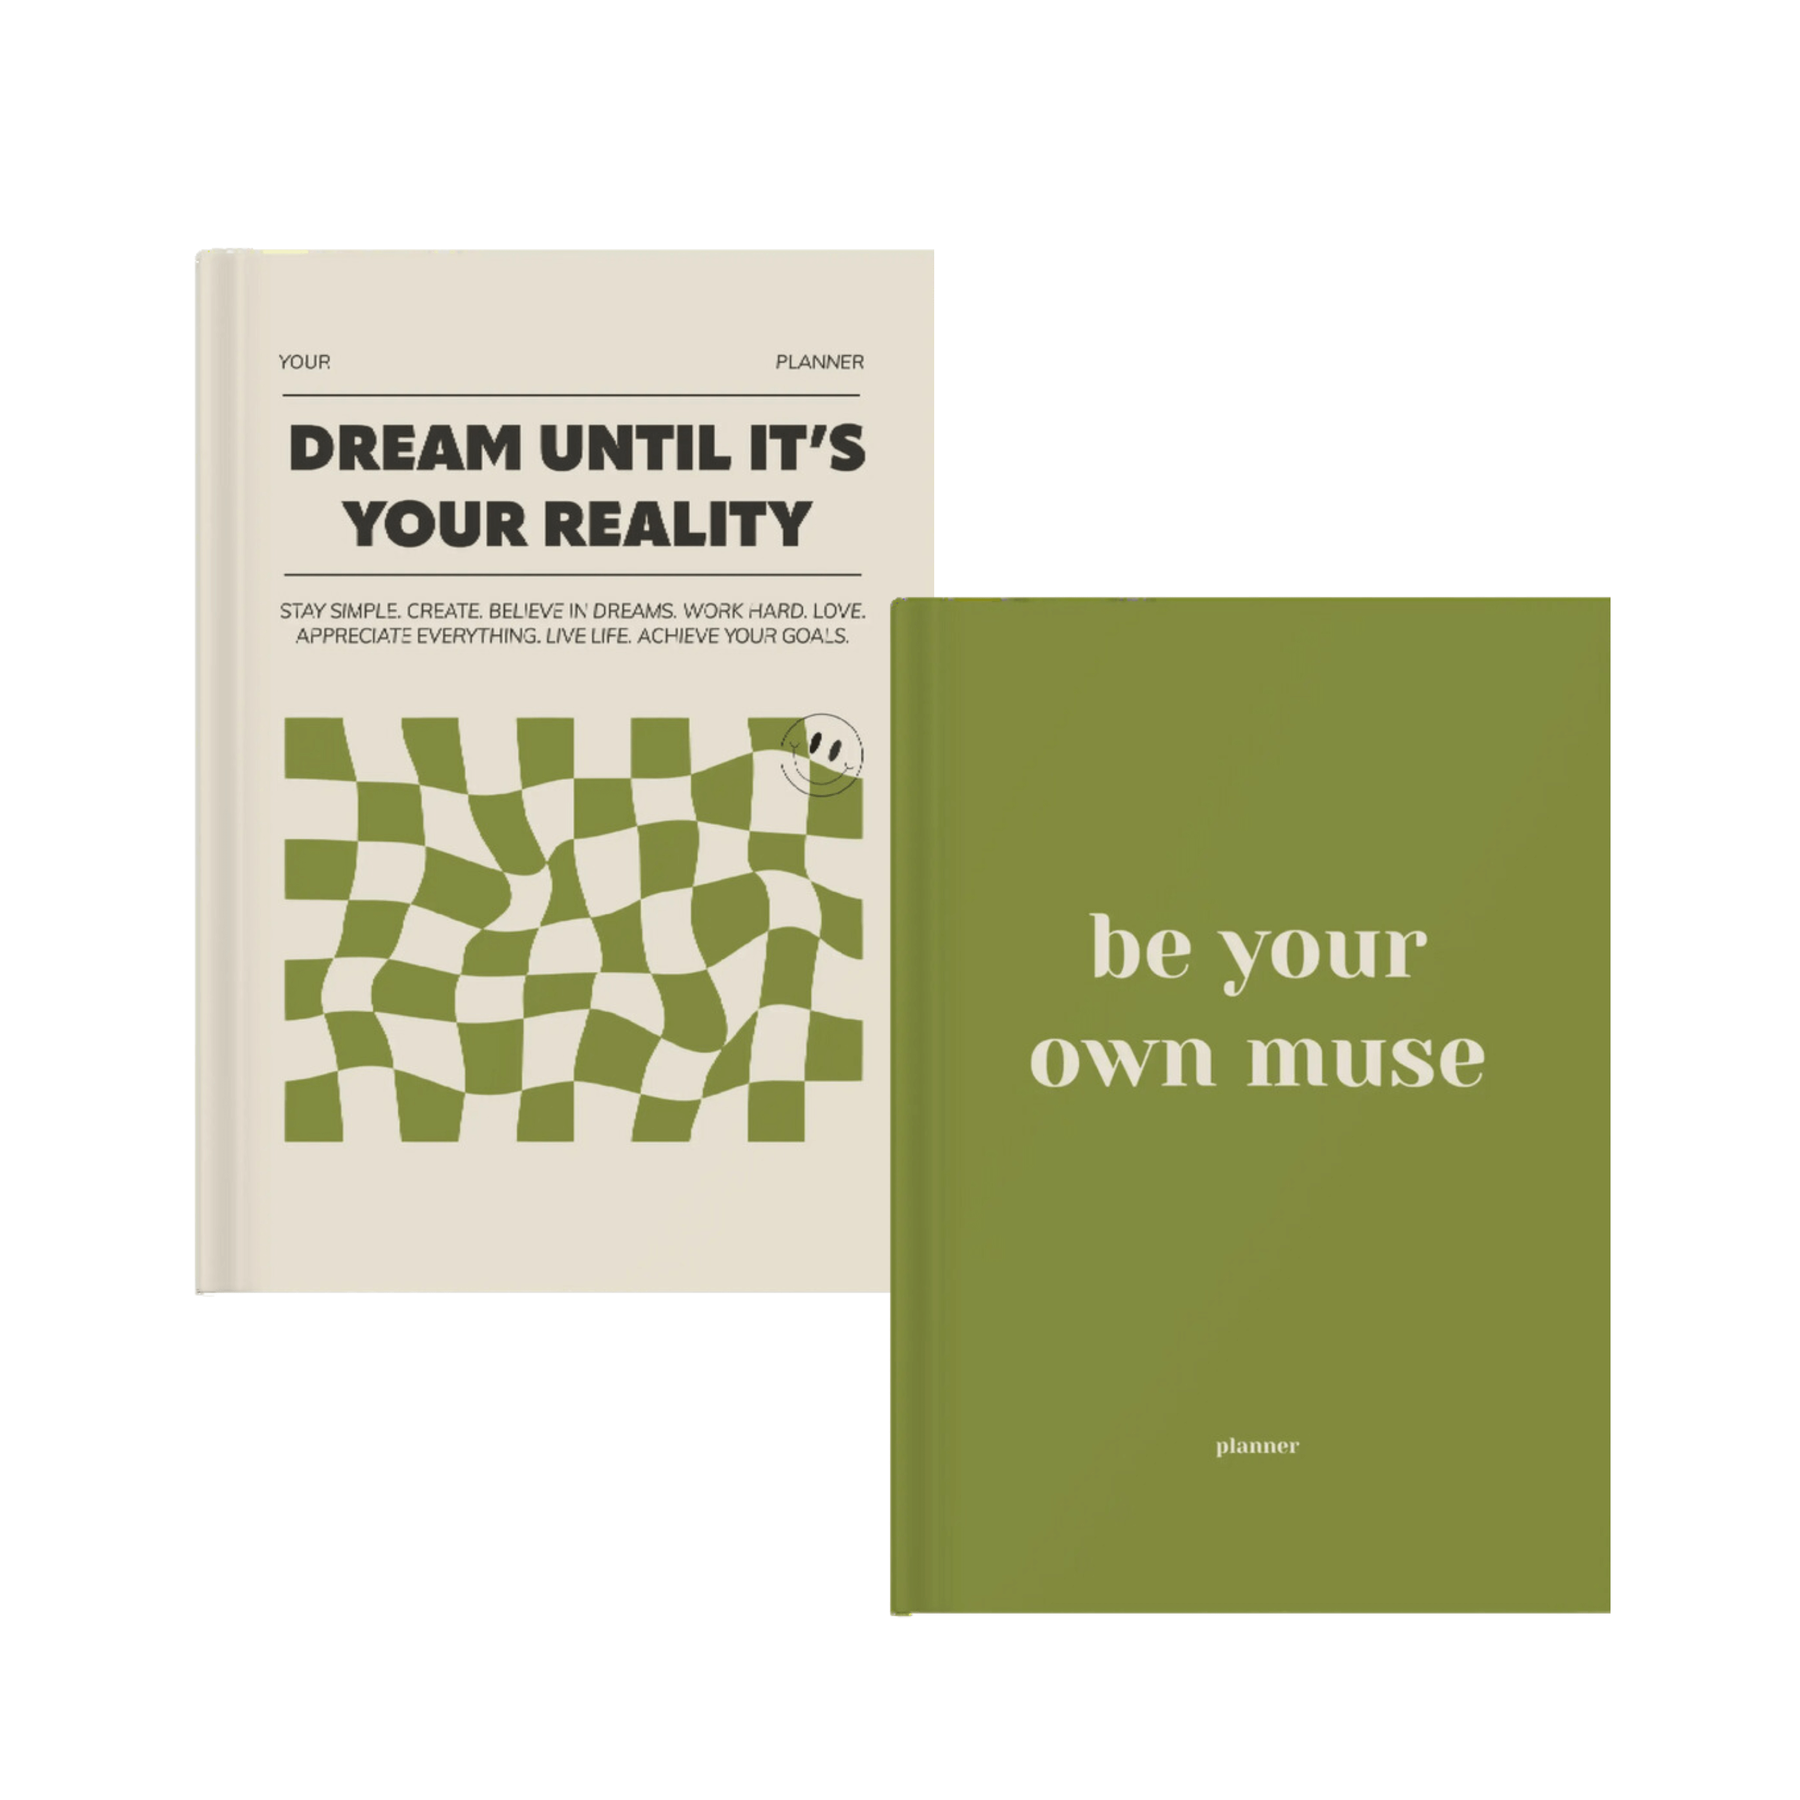 Набір планер + планер , Планер DREAM UNTIL IT'S YOUR REALITY, Планер MUSE